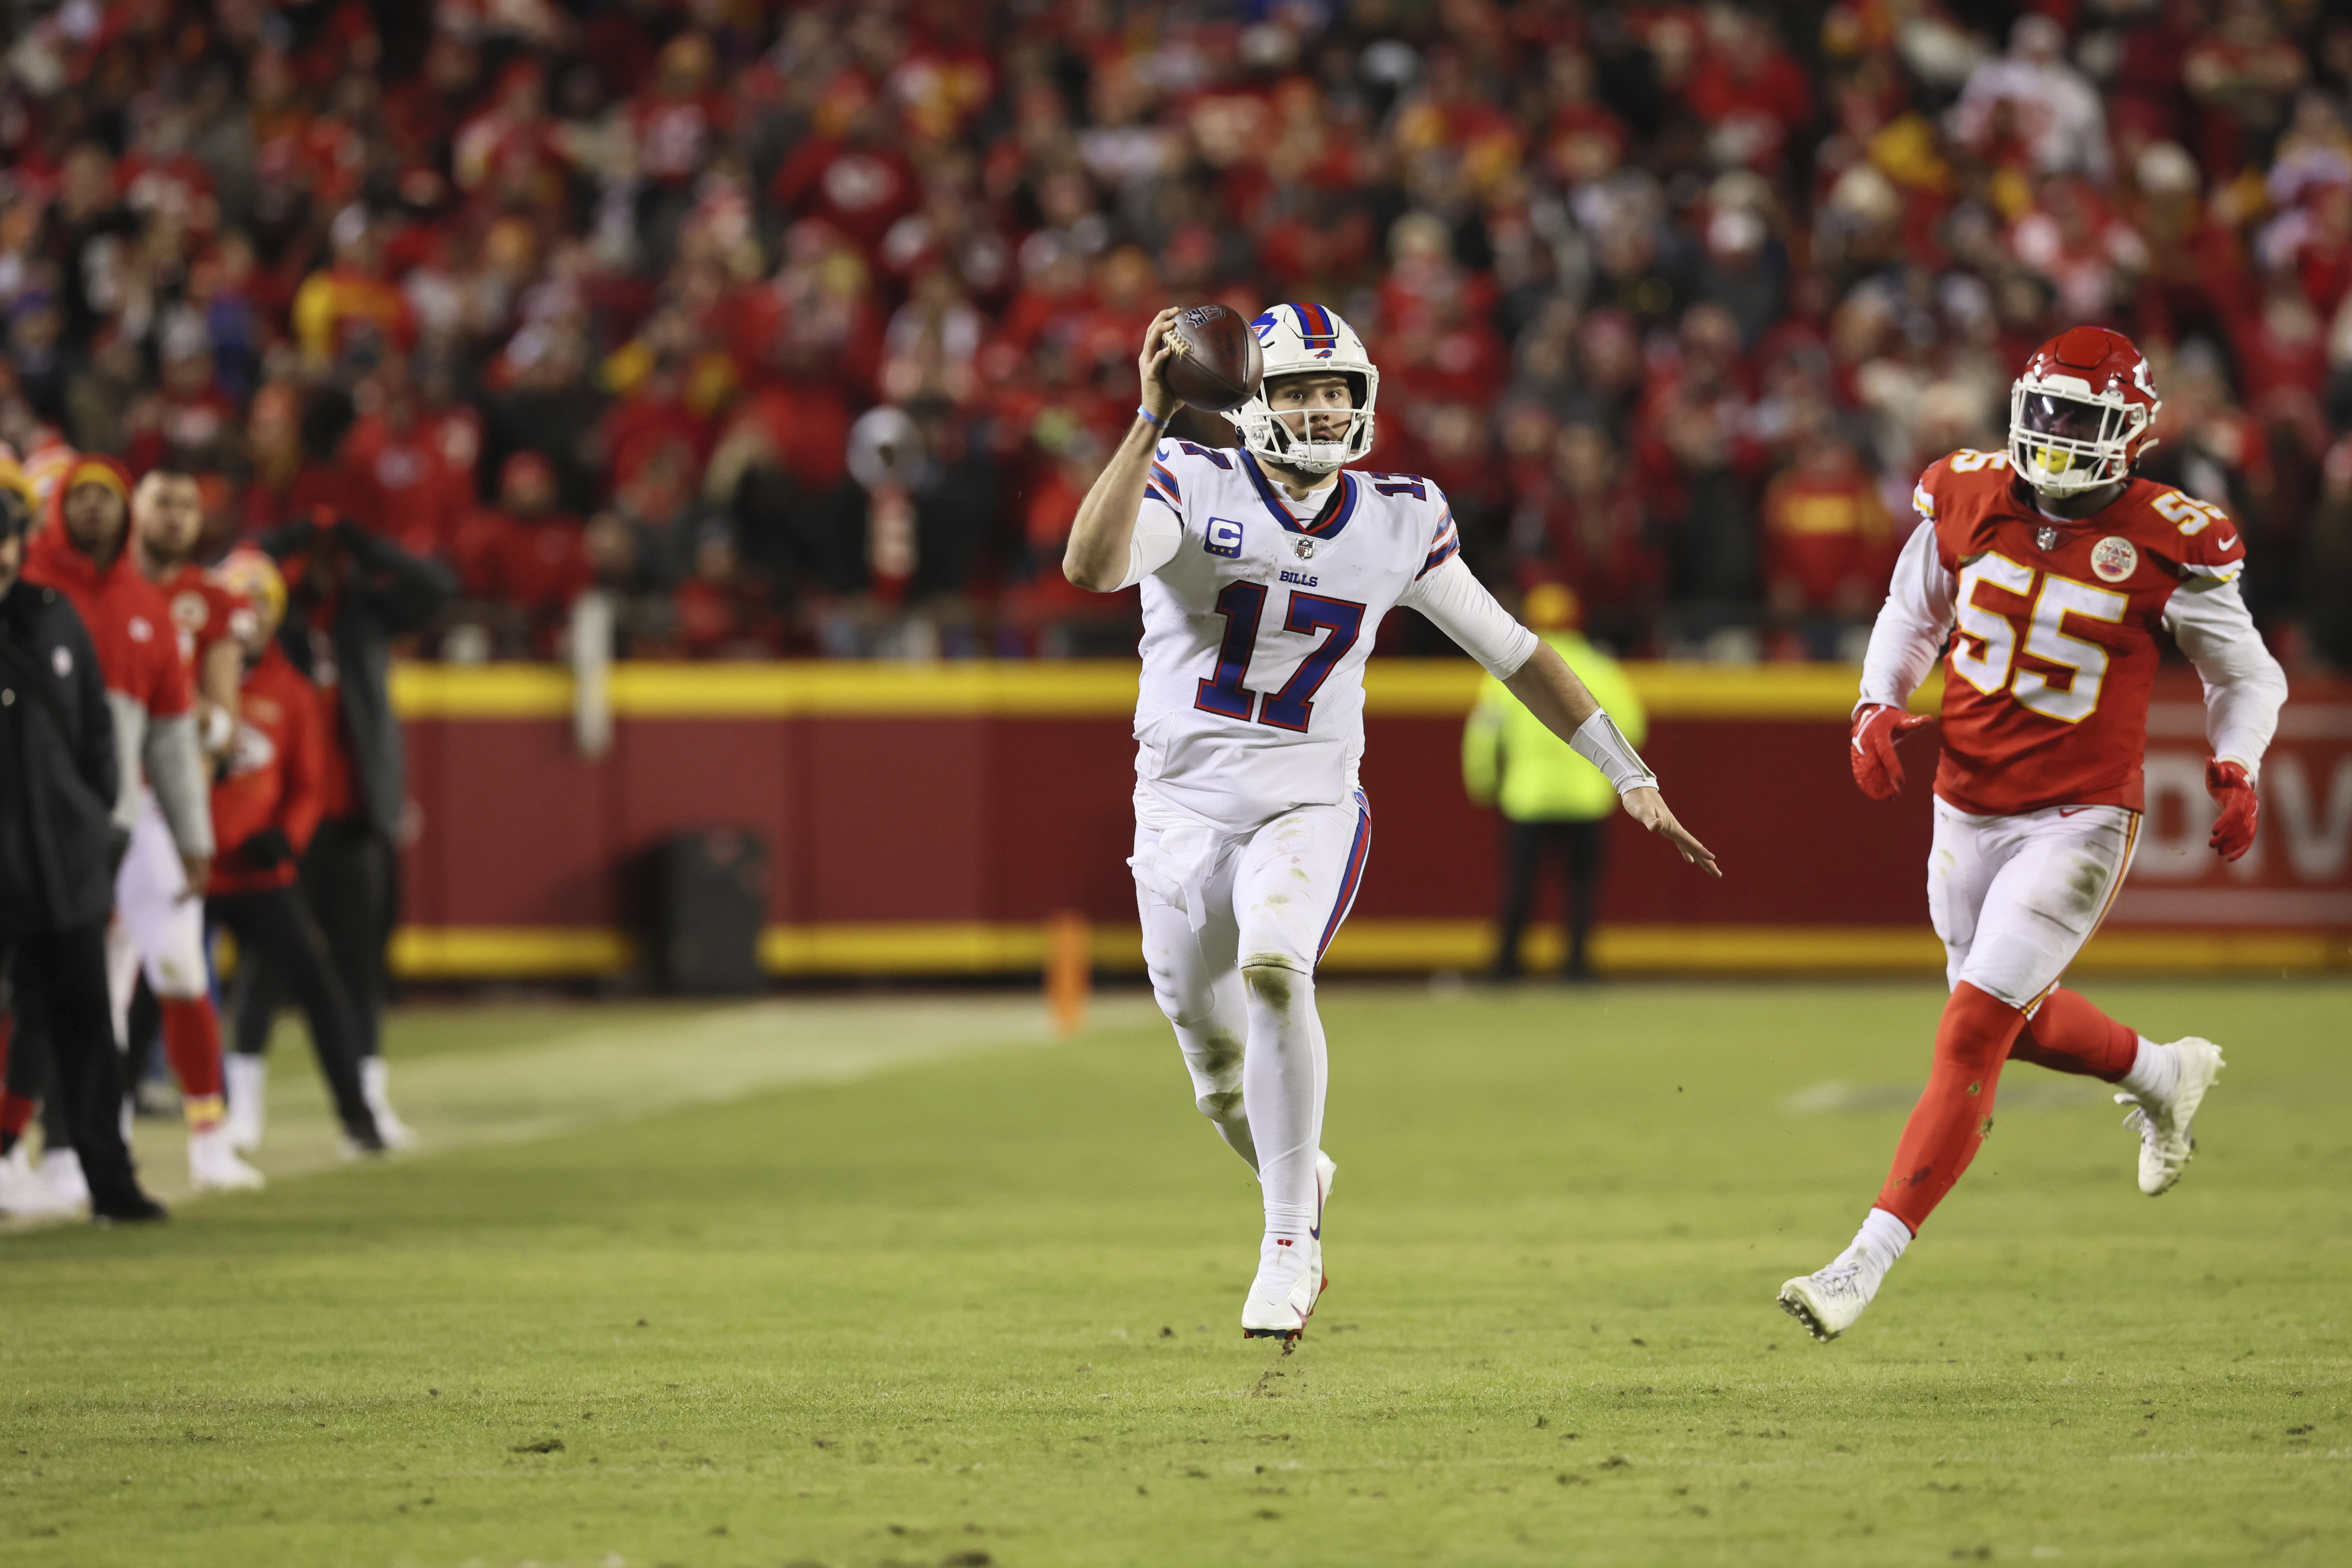 Bills to Propose Changes to NFL Postseason OT Rules After Playoff Loss to Chiefs